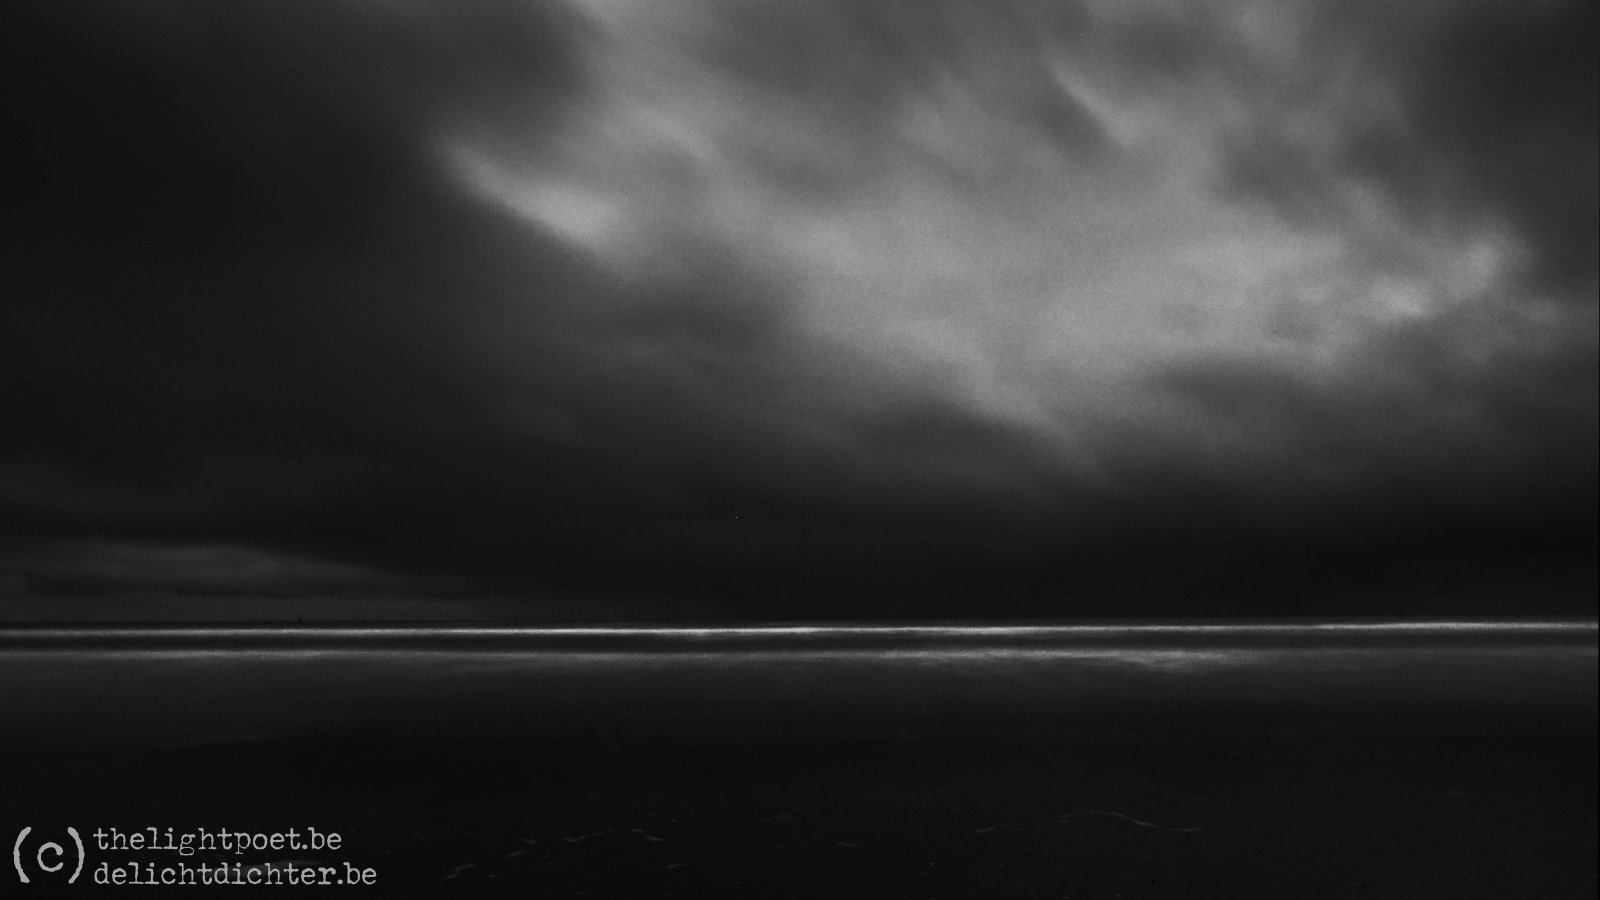 The Sea, in black and white, January 2021